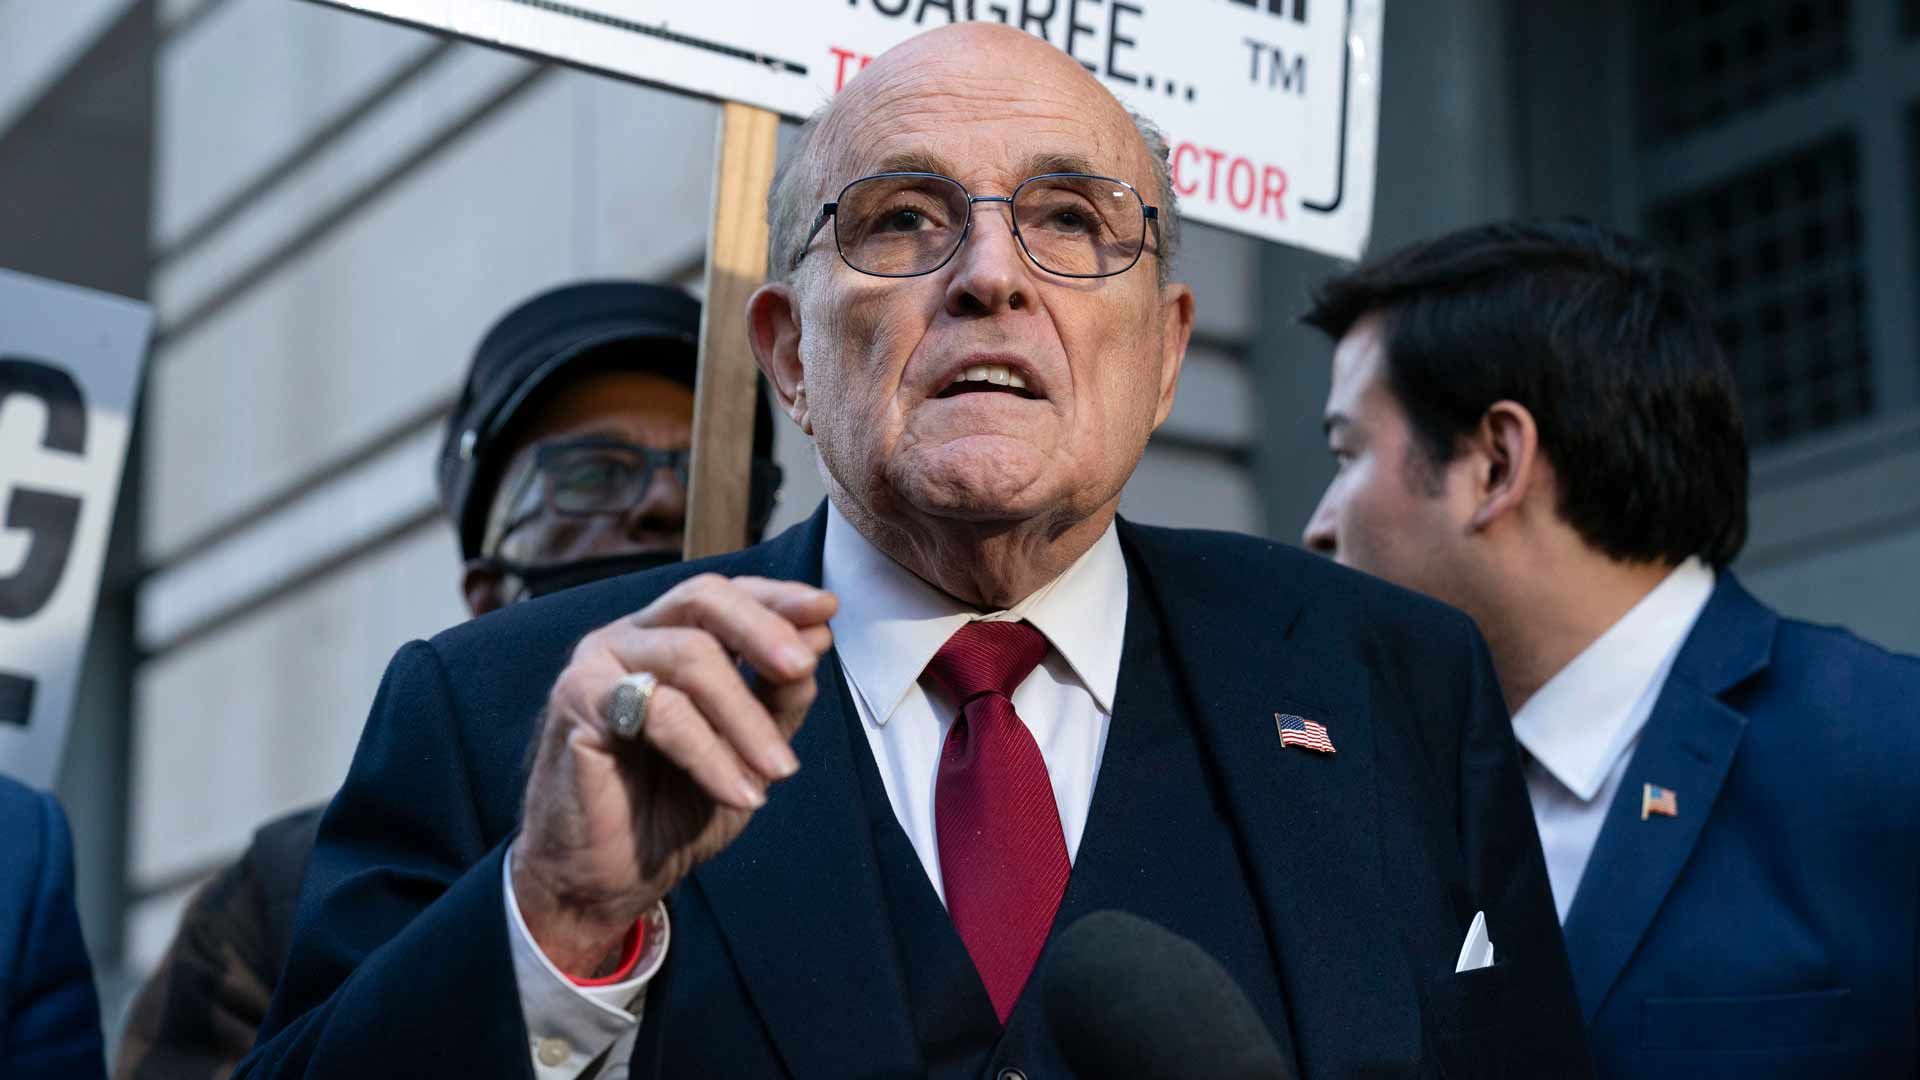 Giuliani is expected to appear in court Tuesday unless he is granted a delay by the court.